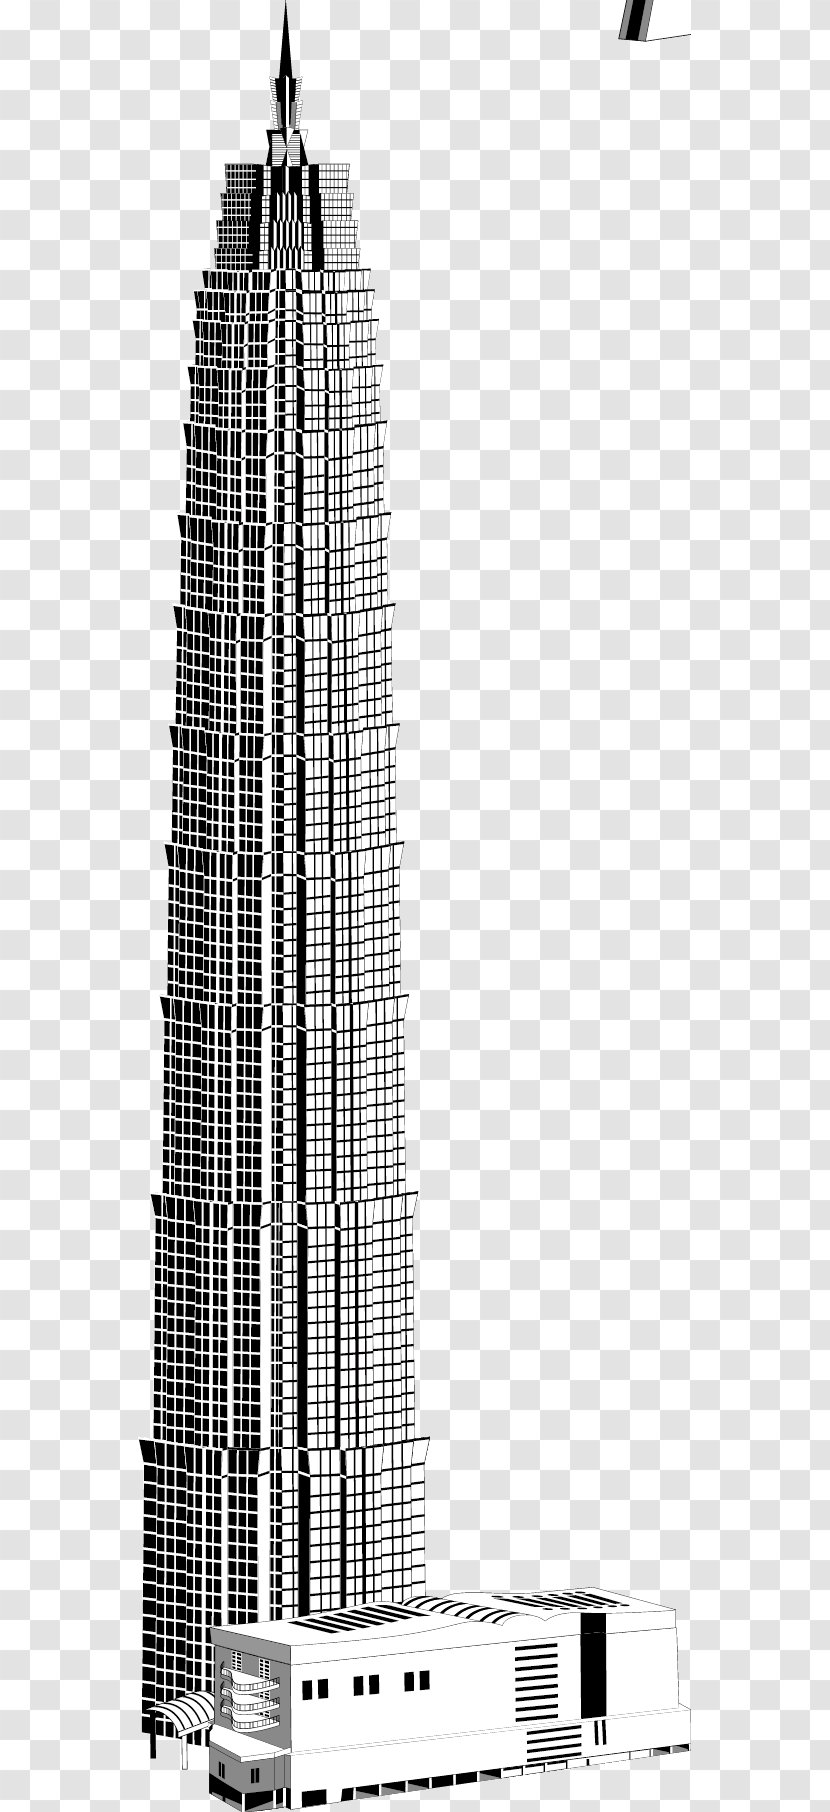 Jin Mao Tower Shanghai World Financial Center HSBC Building, The Bund U4e2du56fdu7b2cu4e00u9ad8u697c Architecture - Elevation - Vector Building Transparent PNG